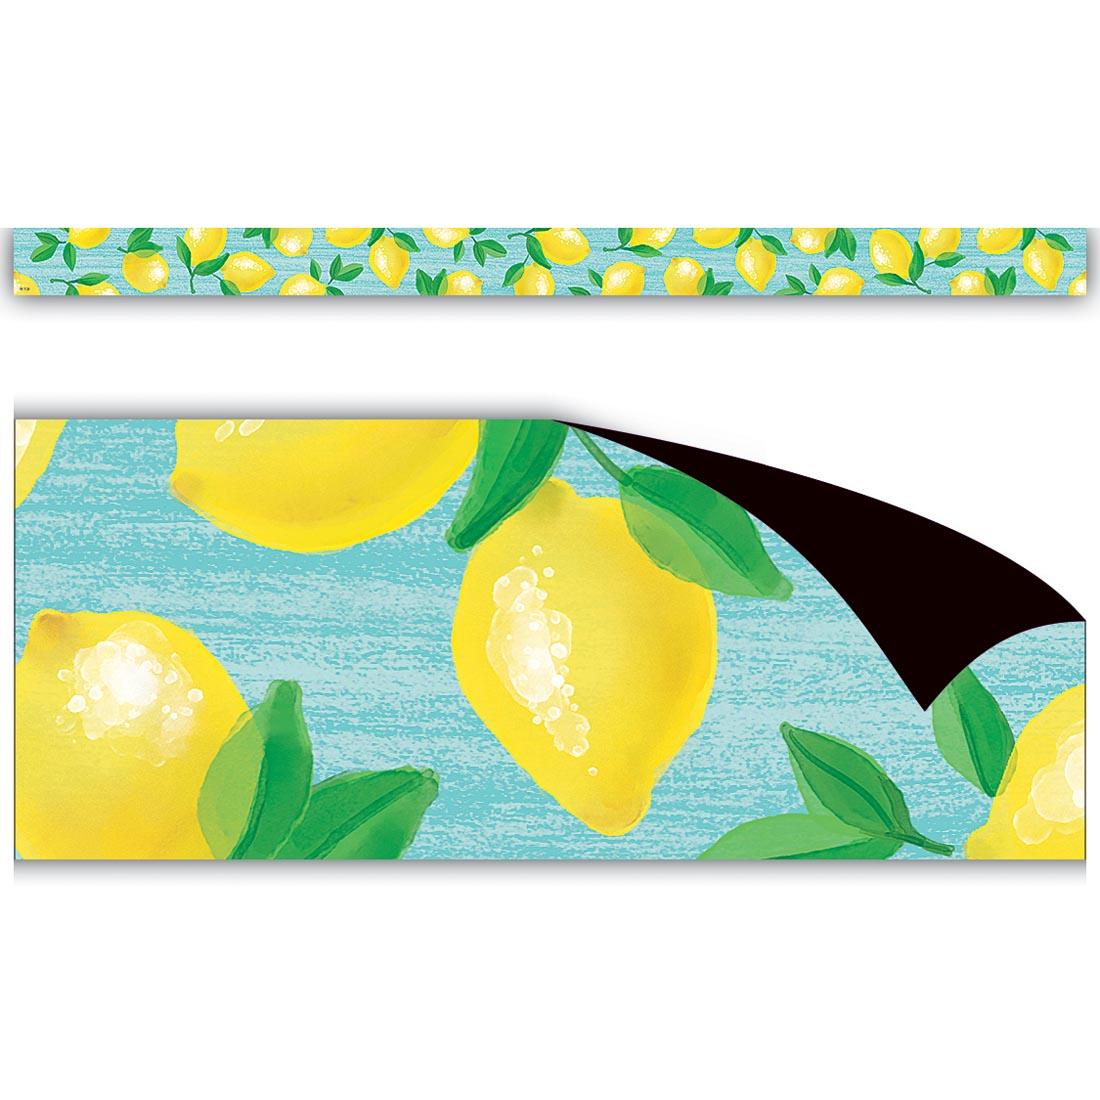 Full view and closeup of the Magnetic Border from the Lemon Zest collection by Teacher Created Resources